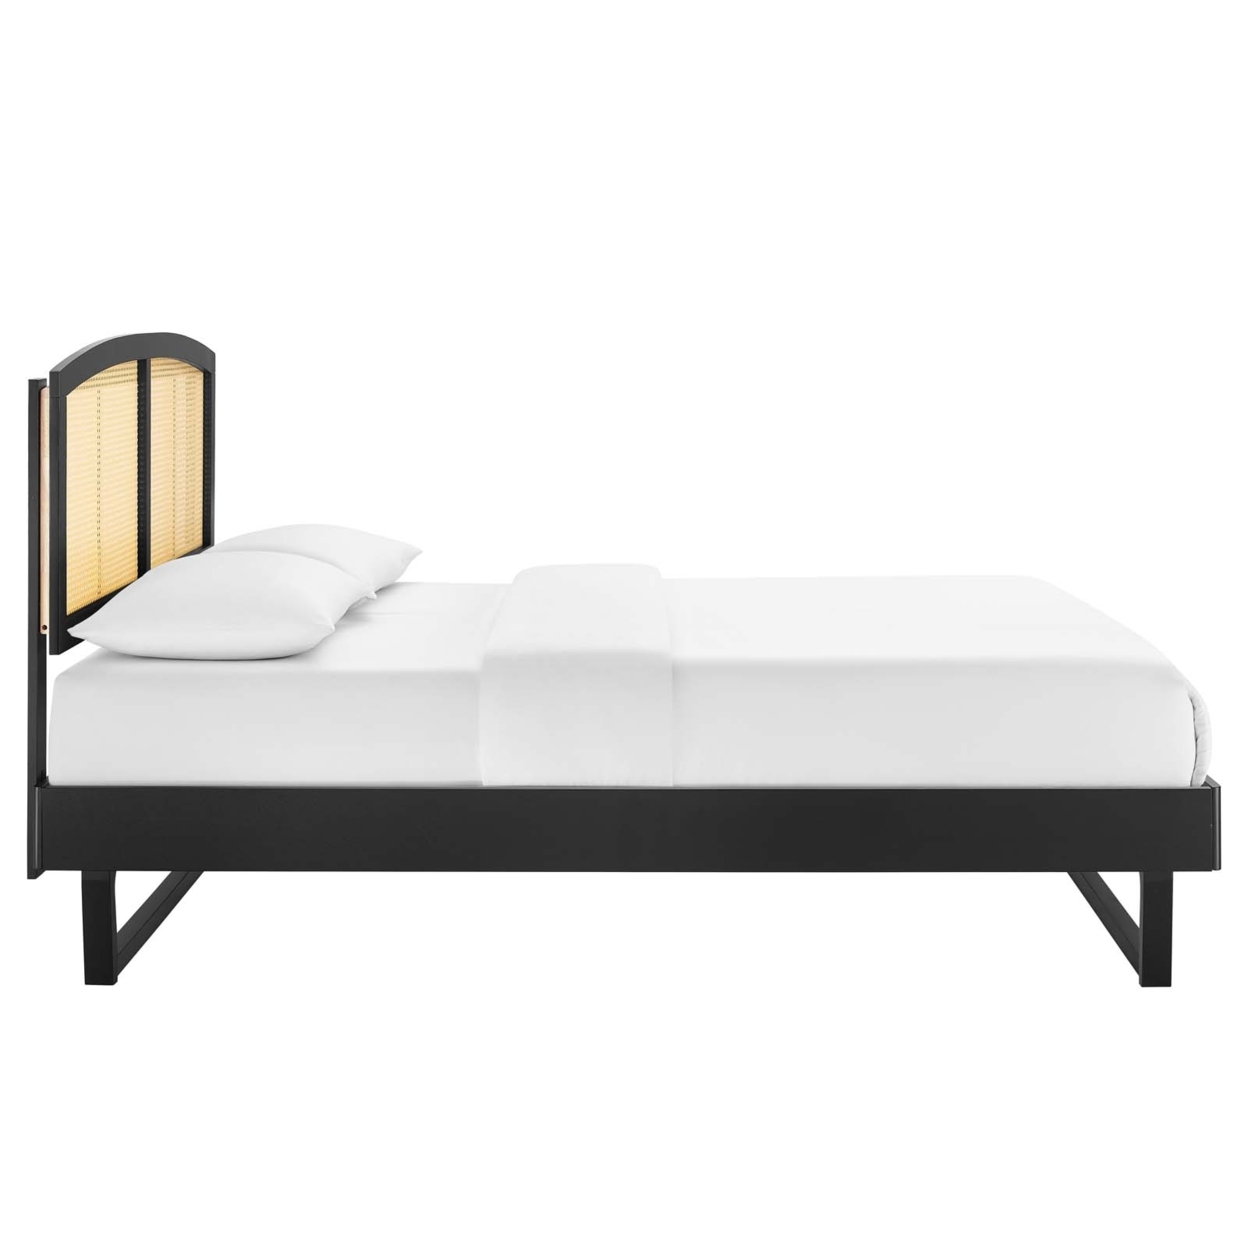 Sierra Cane And Wood King Platform Bed With Angular Legs, Black